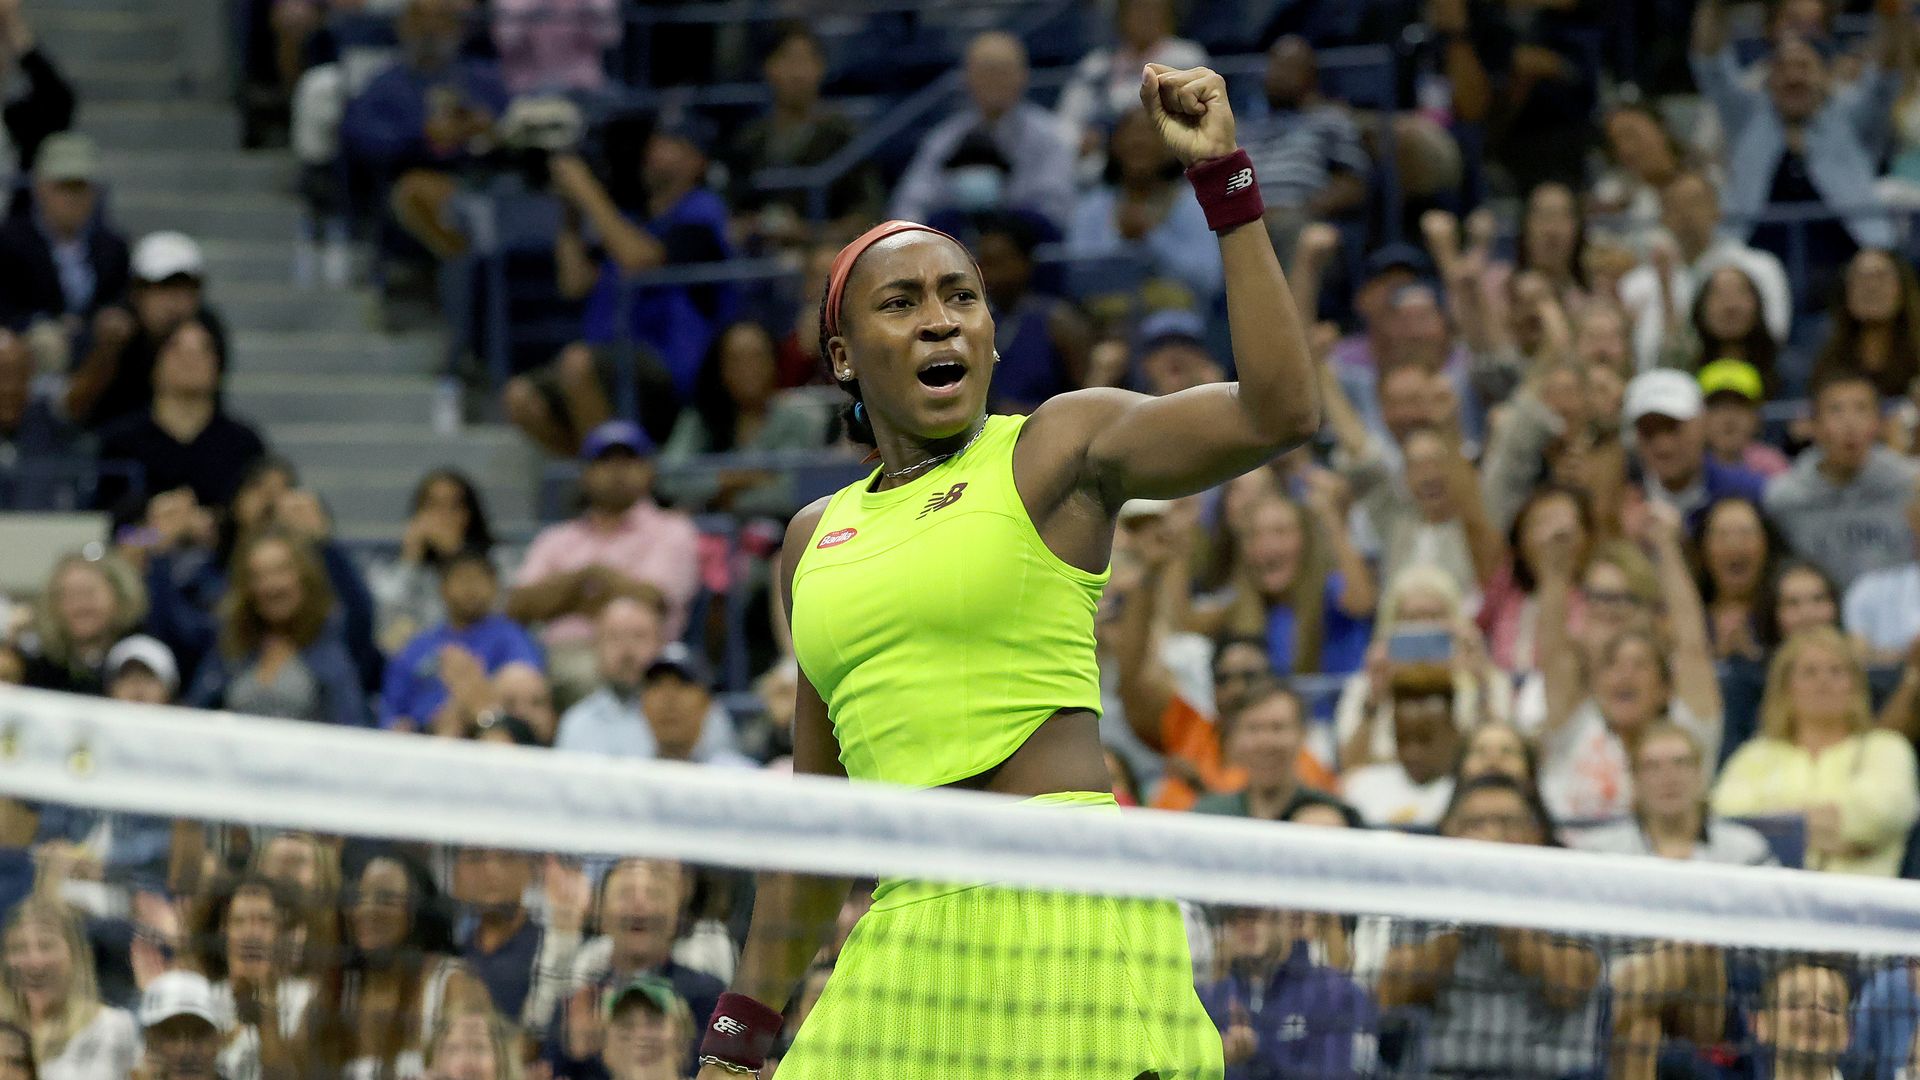 Coco Gauff wearing bright green with spectators in the background. She stands in front of the tennis net with a fist in the air 